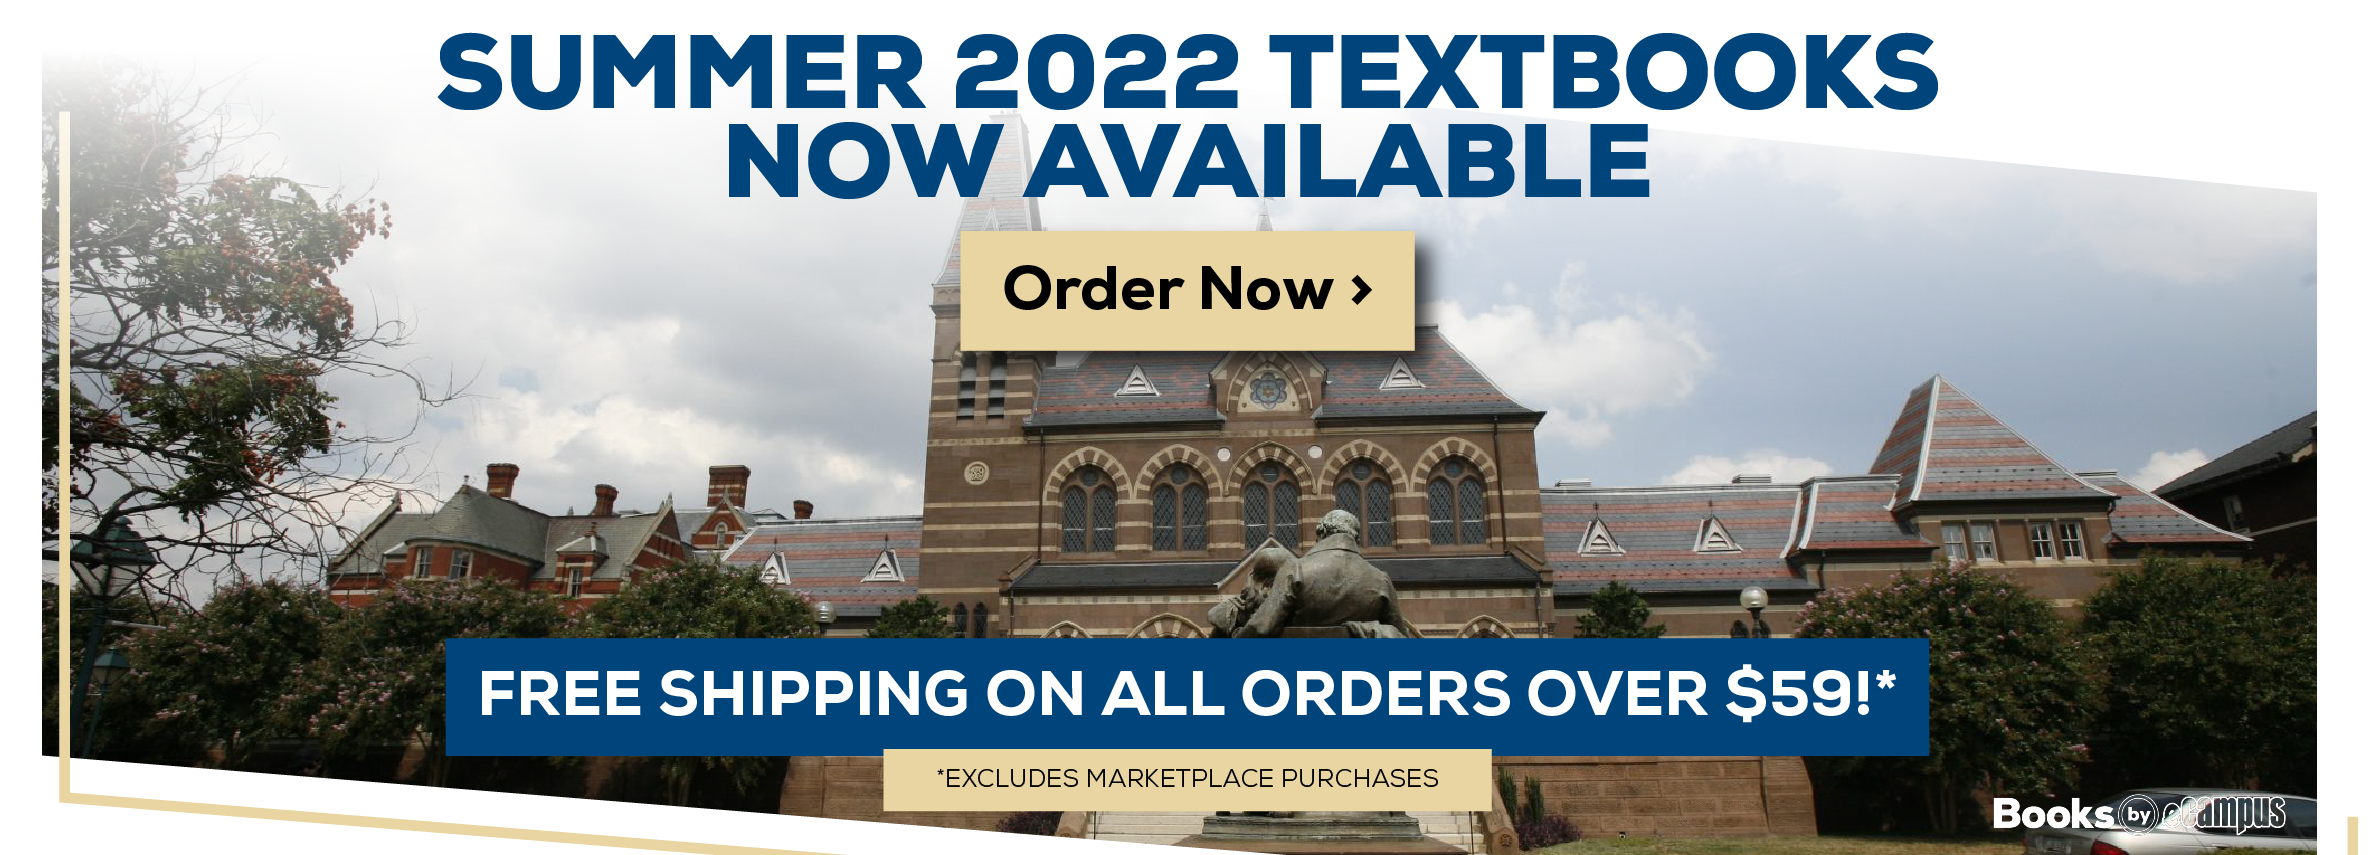 Summer 2022 Textbooks now available. order now. free shipping on all orders over $59